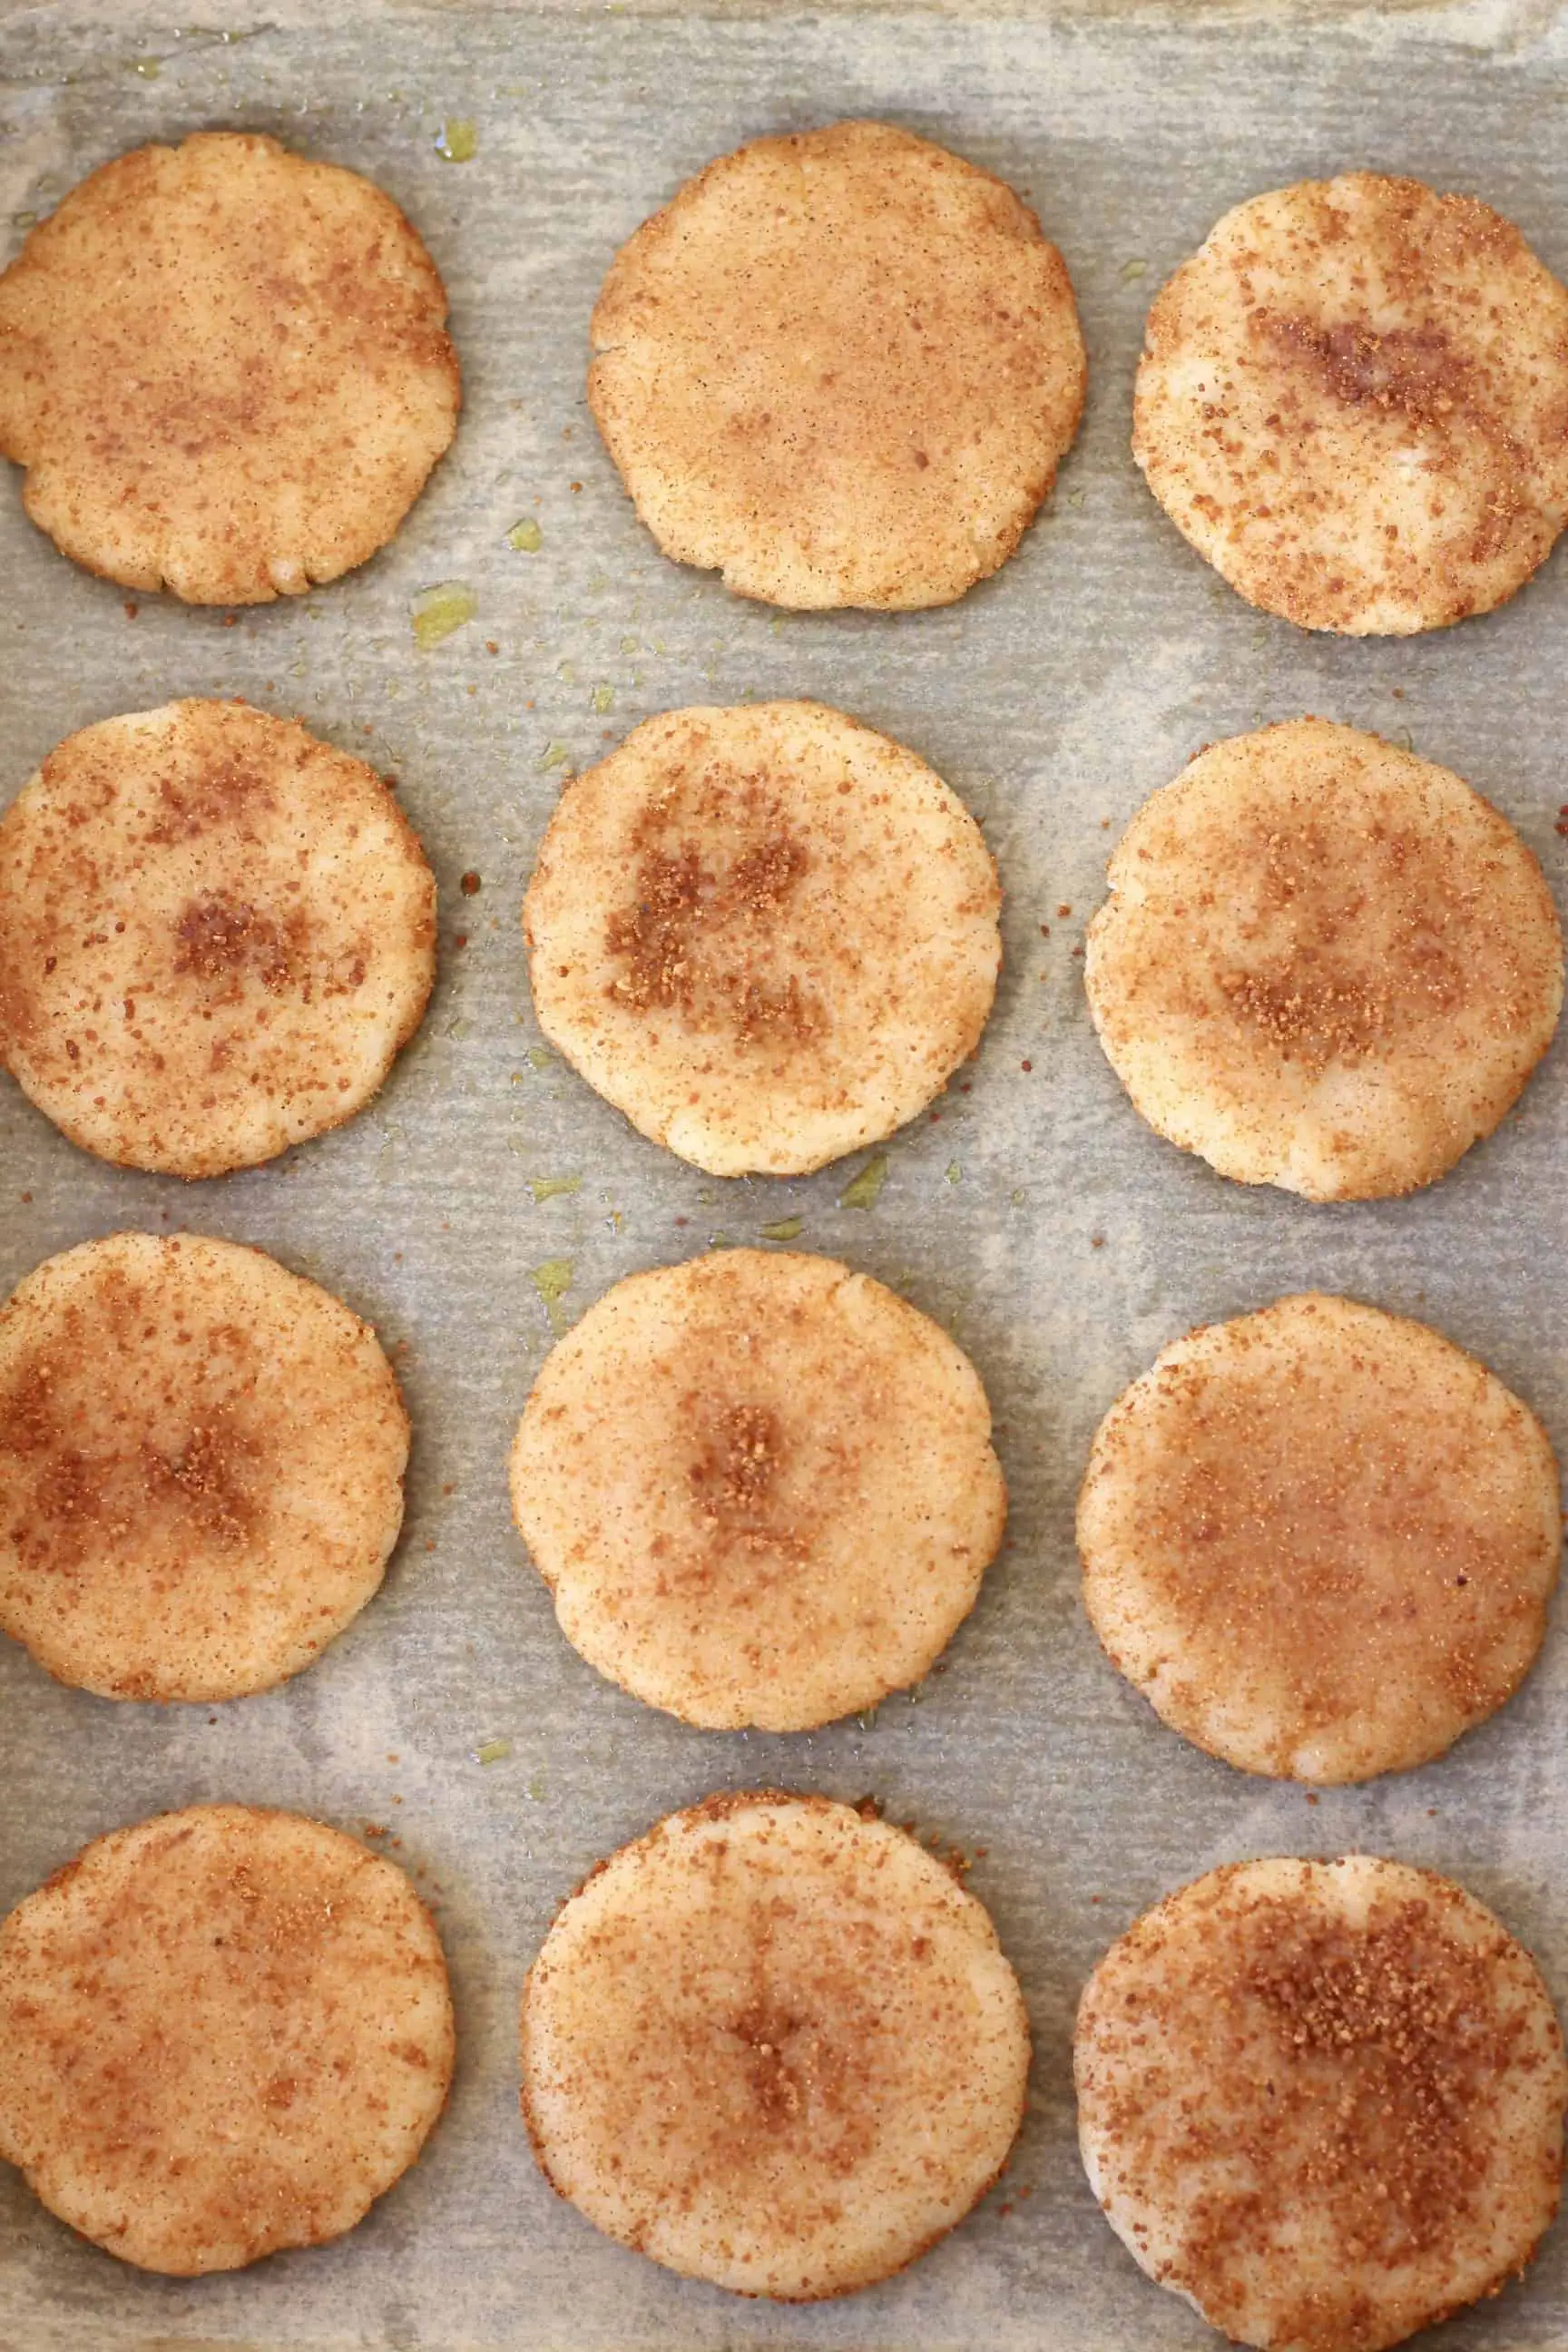 Twelve raw gluten-free vegan snickerdoodles on a baking tray lined with baking paper